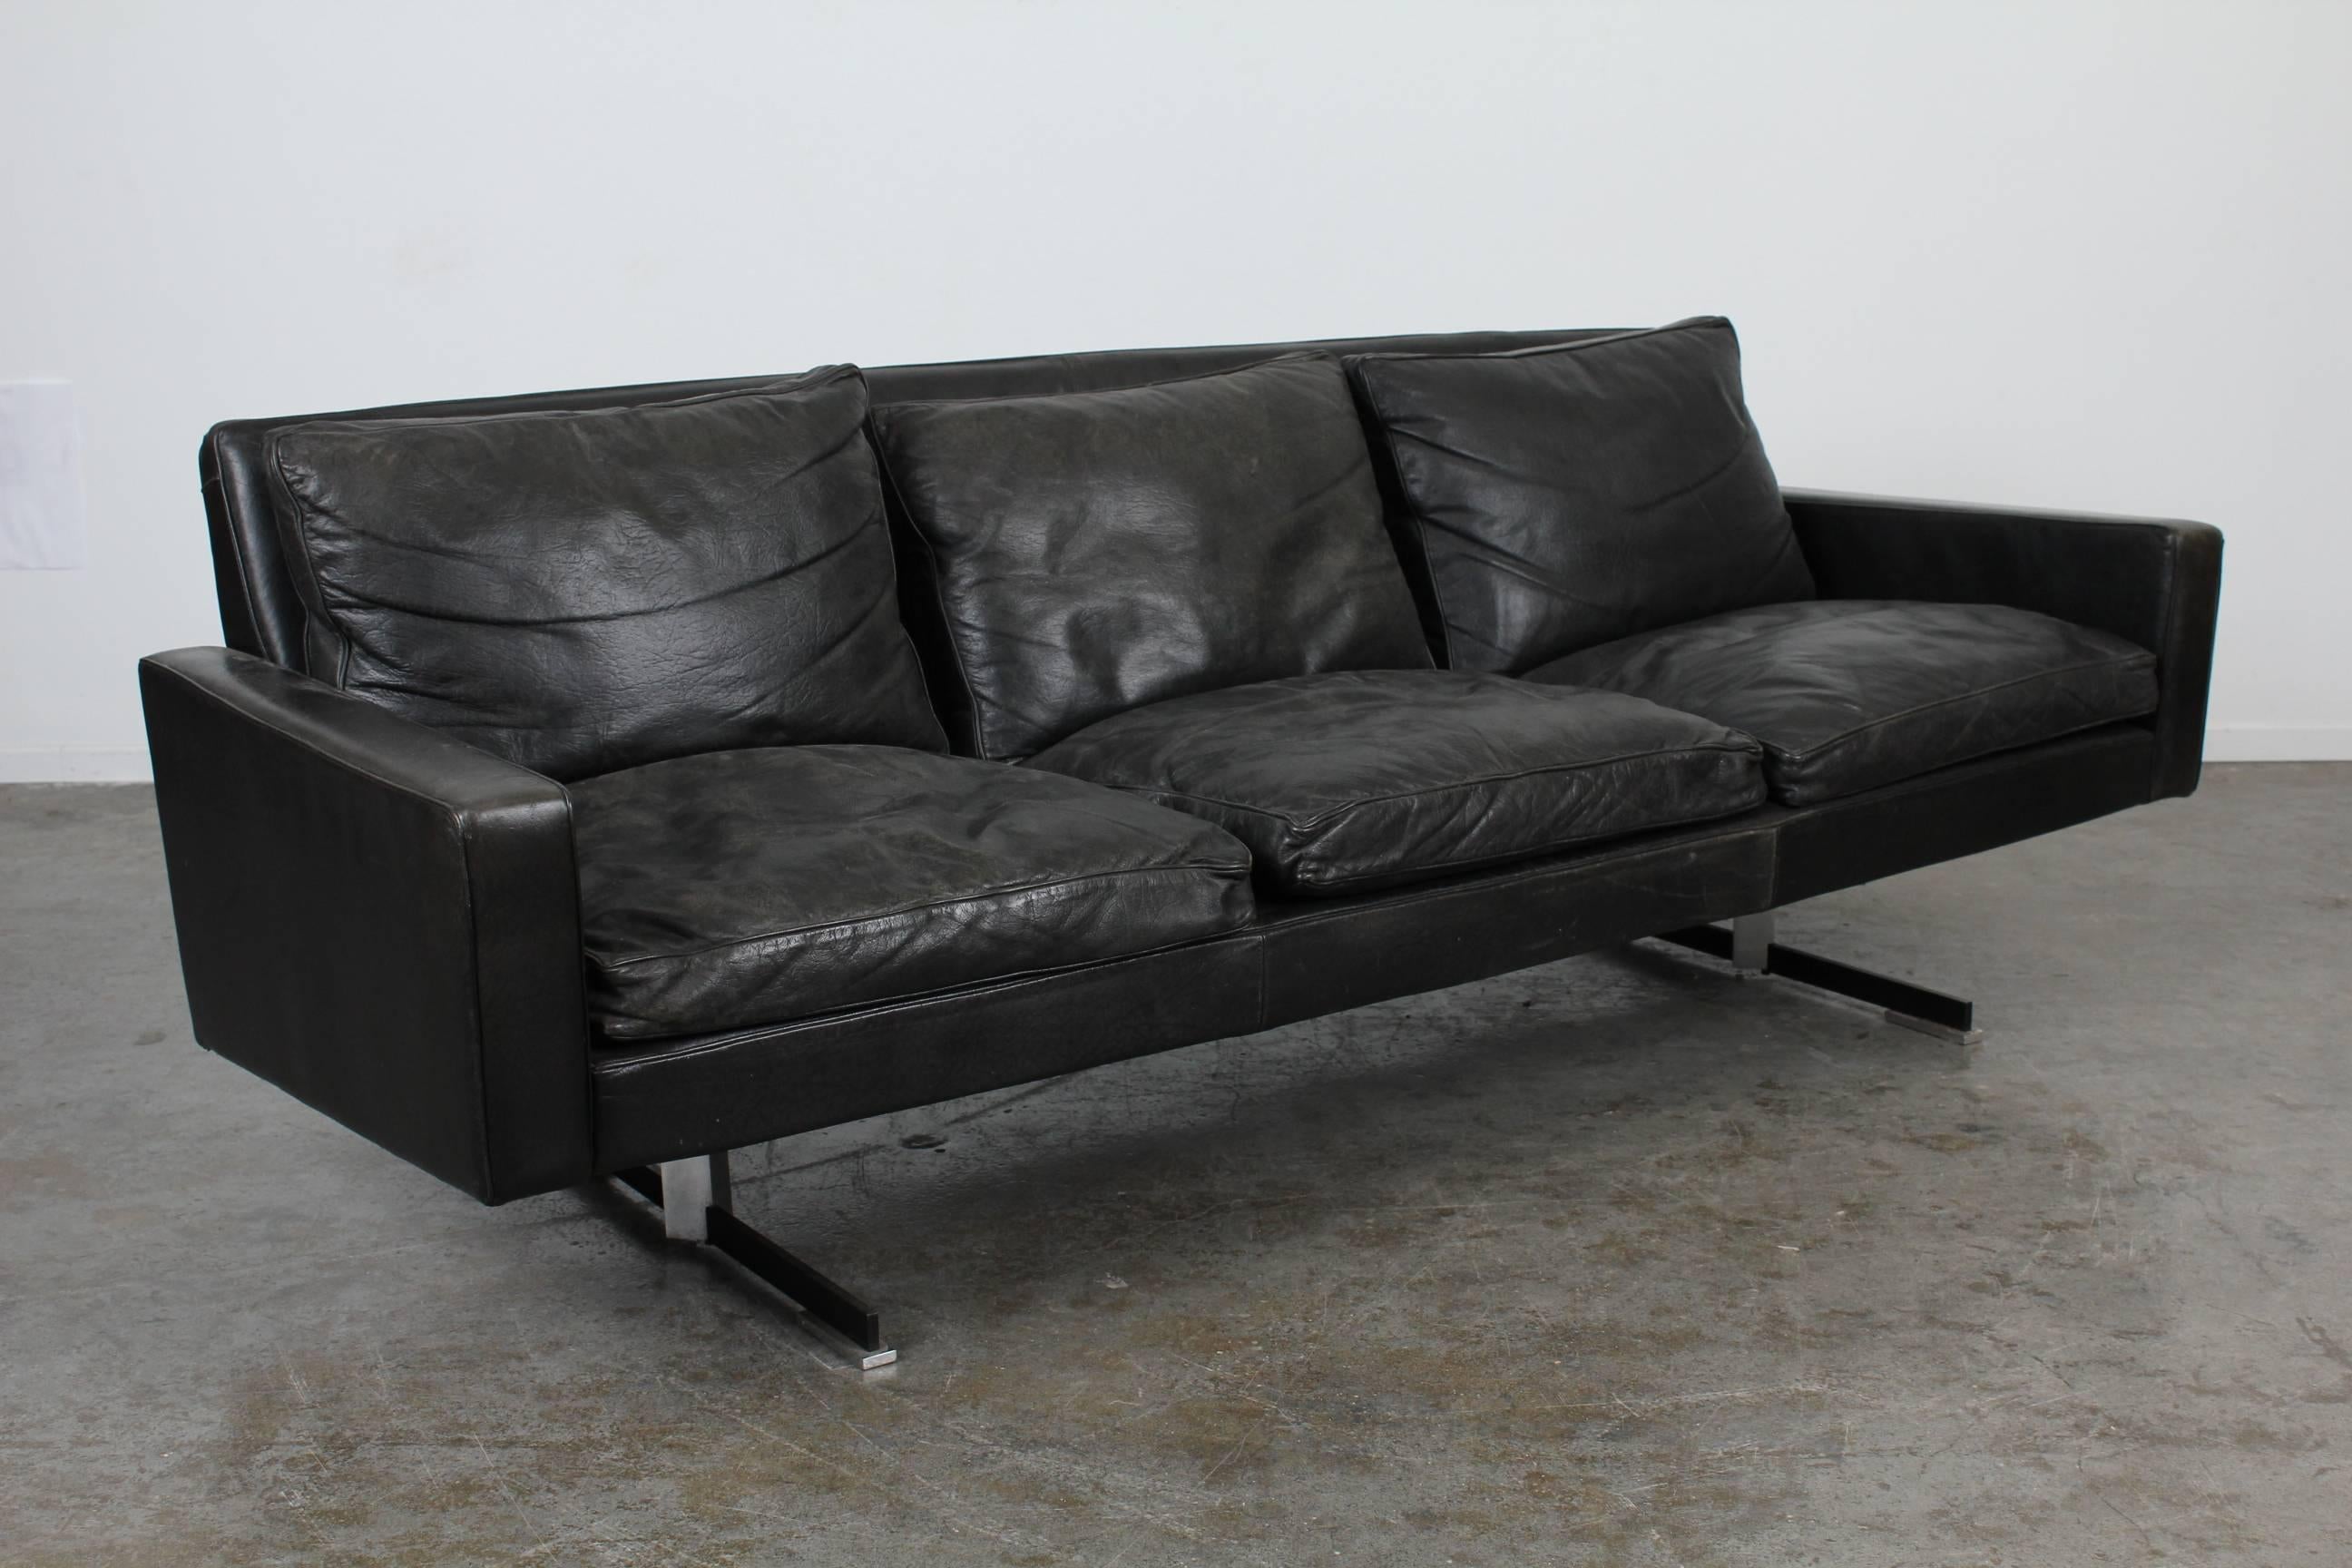 Mid Century Modern Sofa, with original black leather and chrome legs